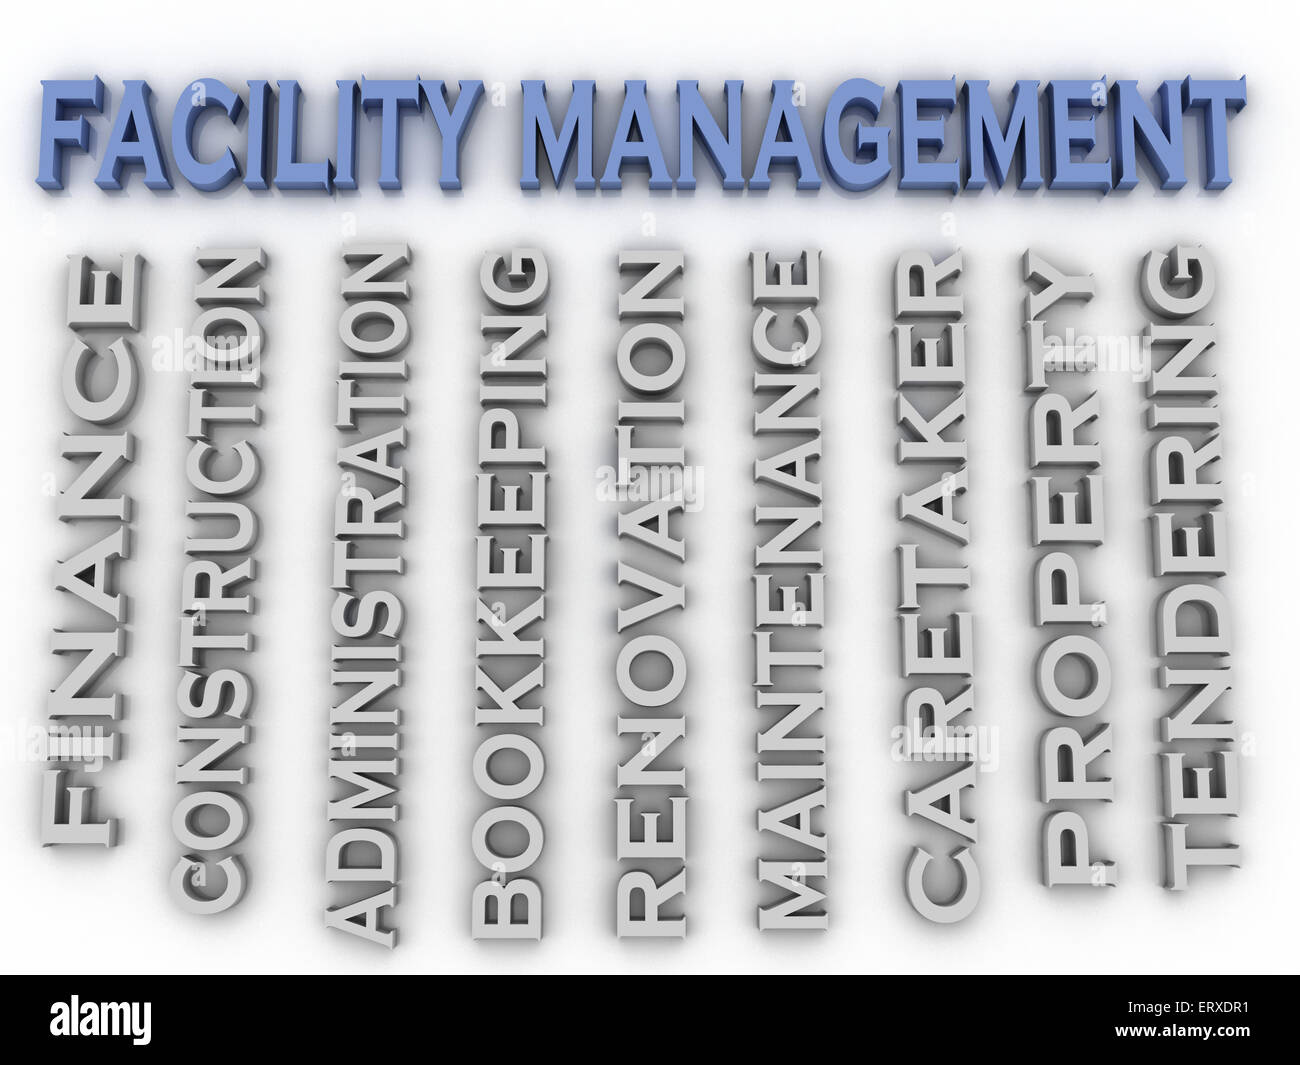 3d image Facility management concept word cloud background Stock Photo